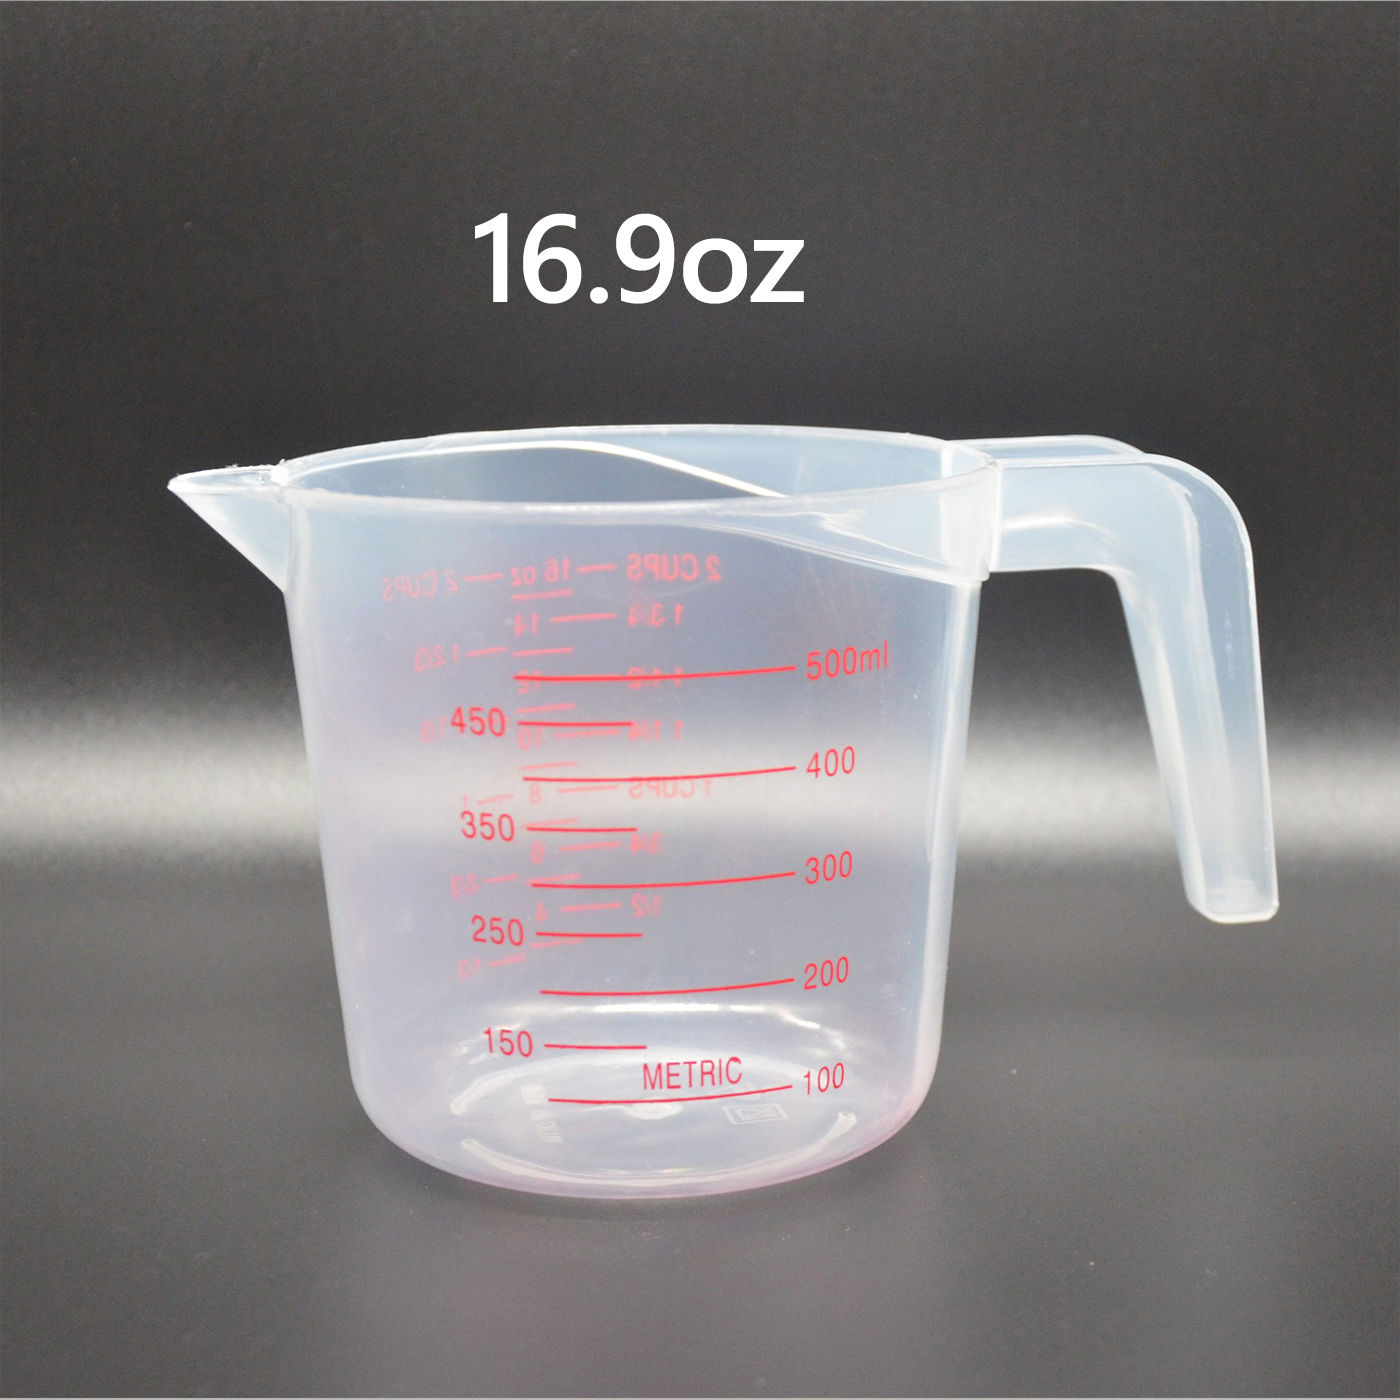 NEW 1L Plastic Measuring Jug Cup Graduated Surface Cooking Bakery Container  School Learning stationery laboratory supplies